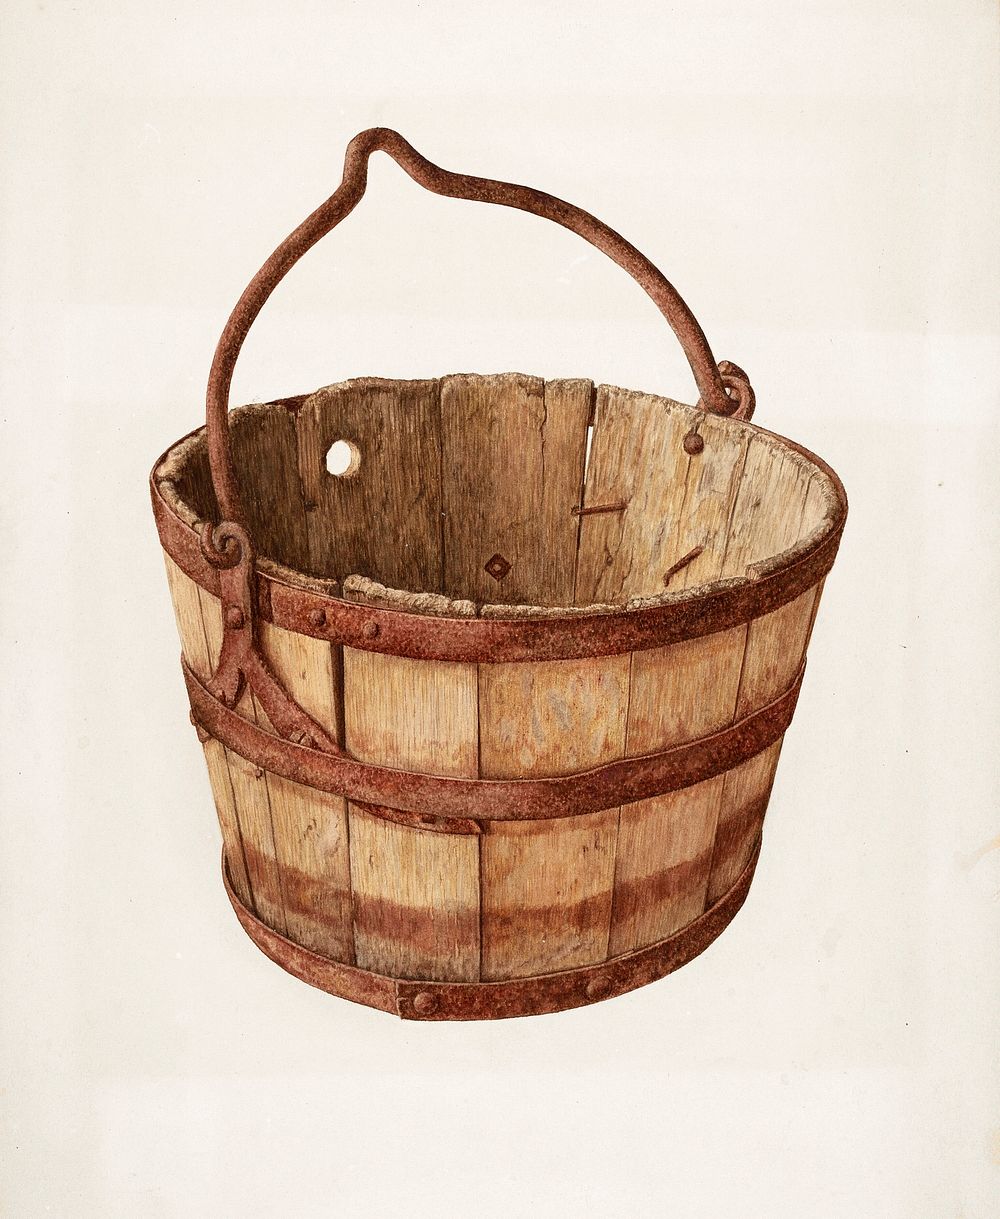 Miner's Ore Bucket (1939) by Max Fernekes. Original from The National Gallery of Art. Digitally enhanced by rawpixel.